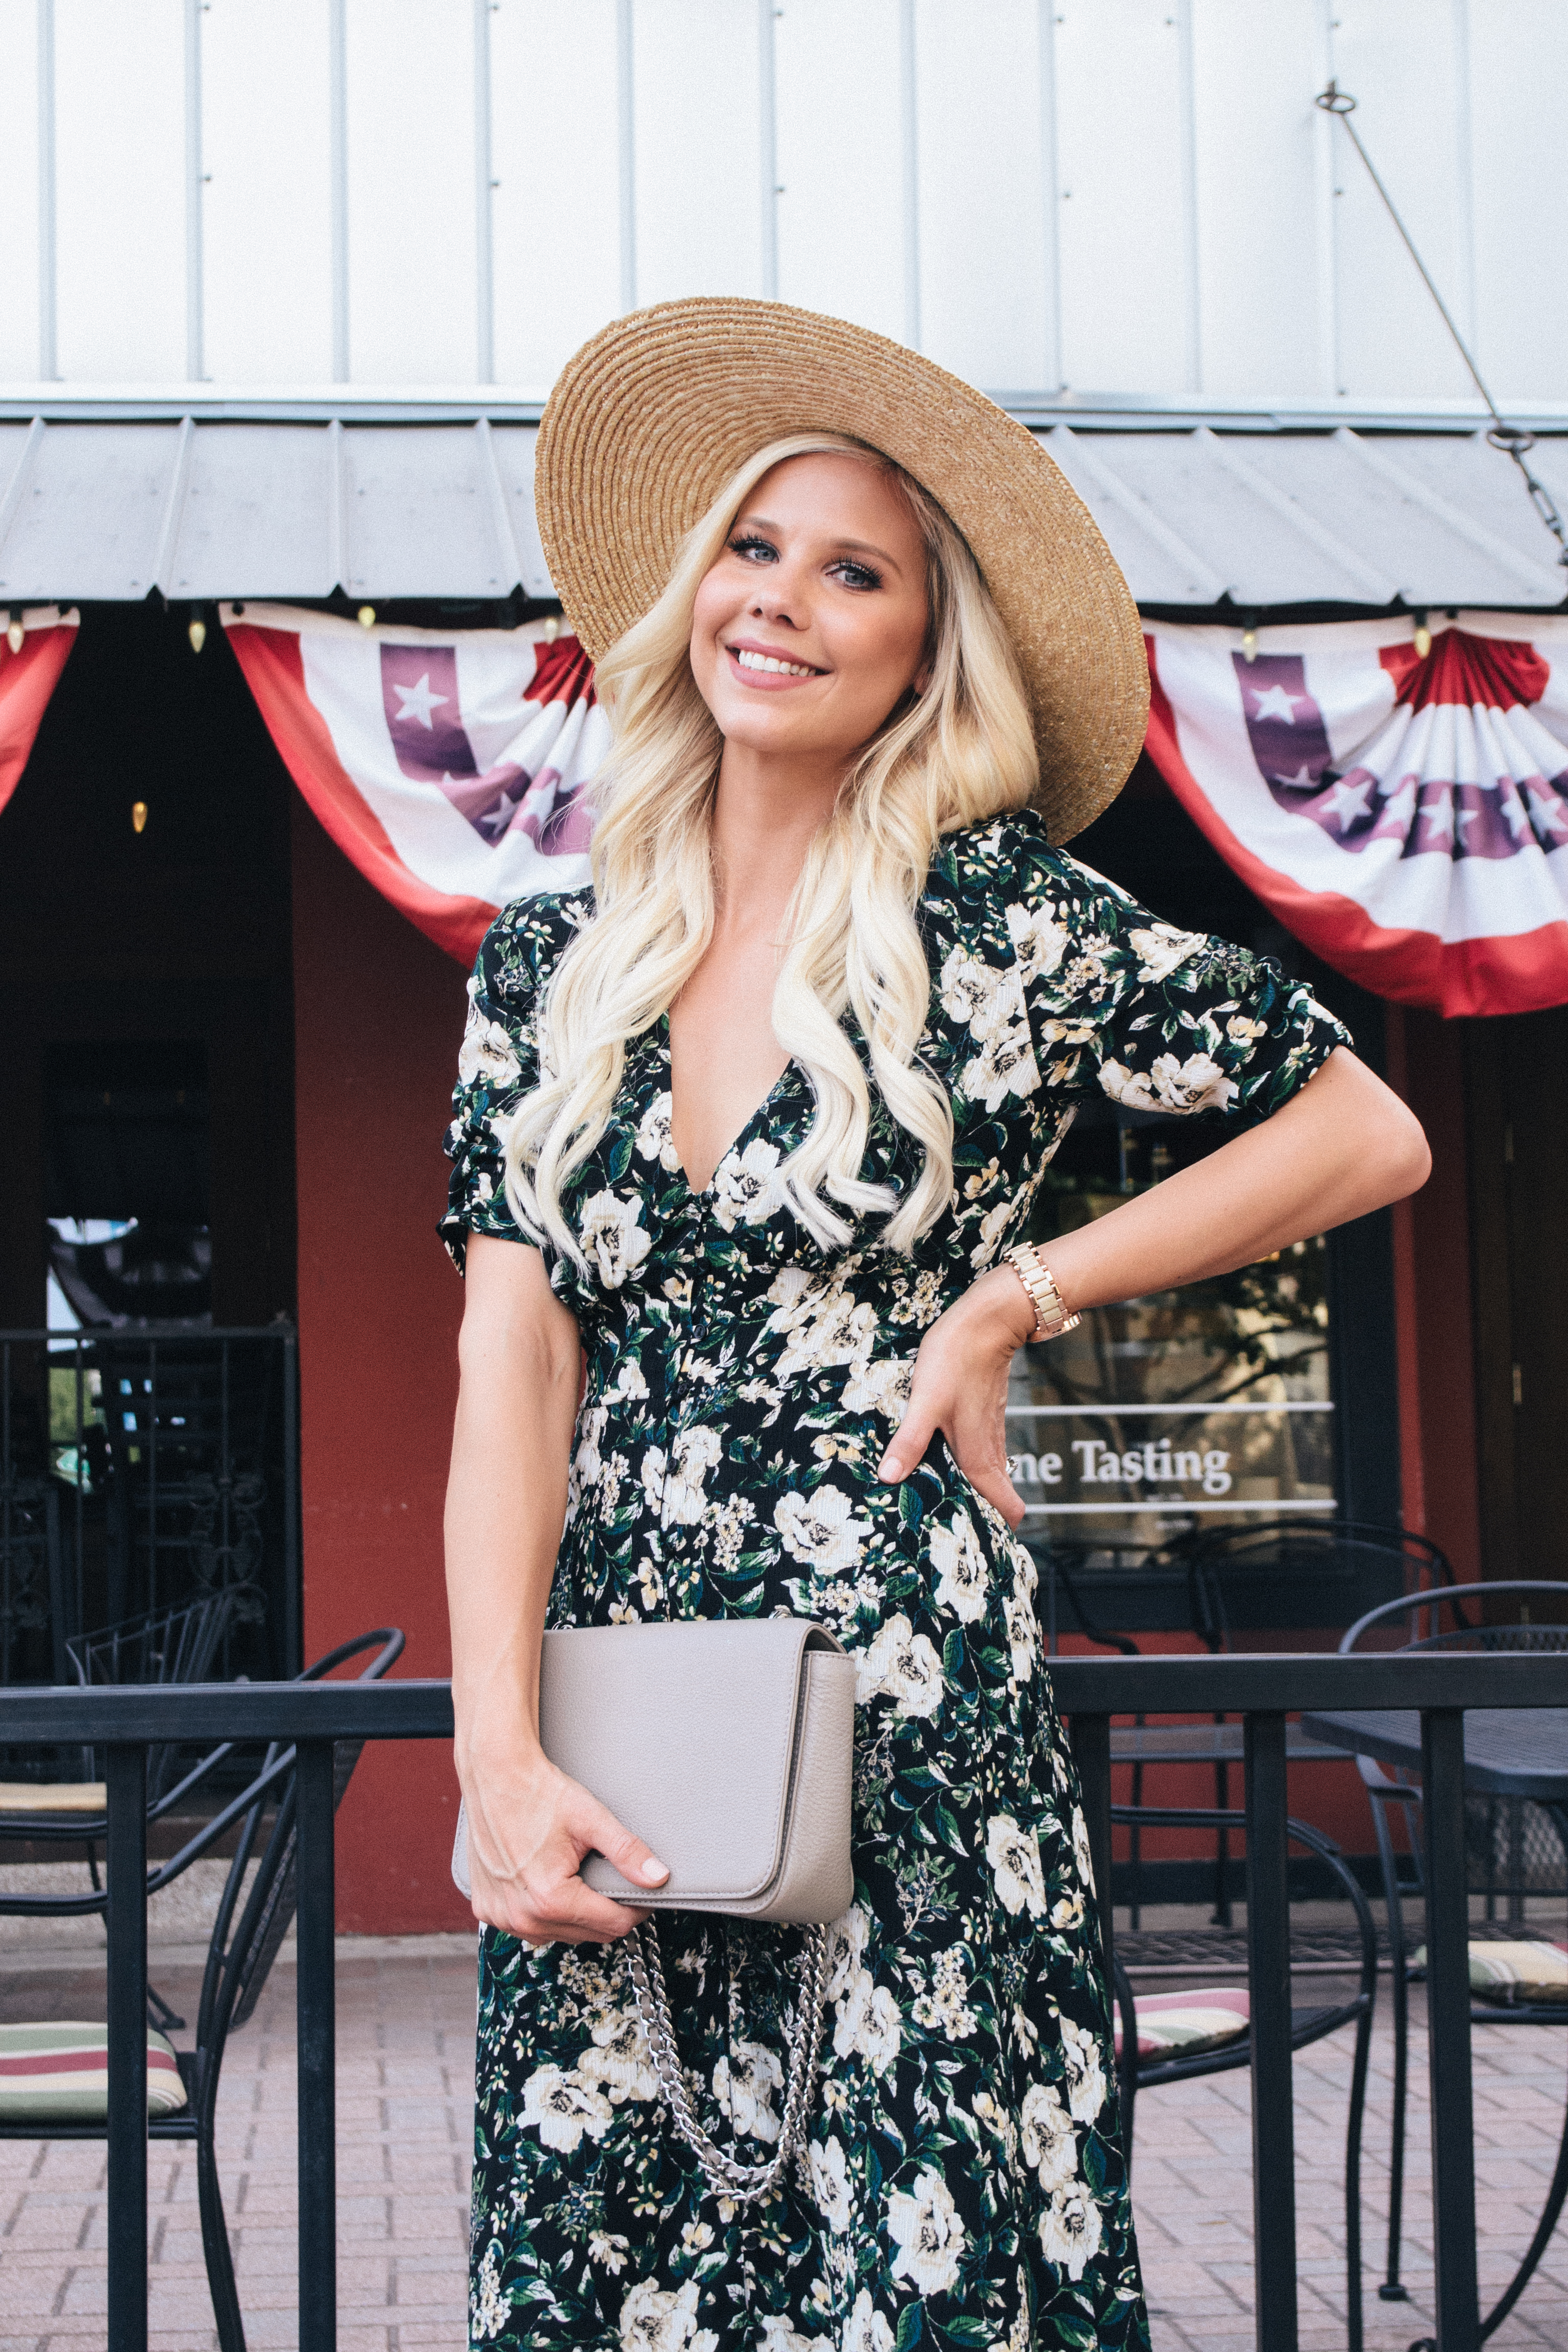 this green and white floral dress is the perfect outfit for fall transition. Get your wardrobe ready for Fall with these tips from Dallas fashion blogger Hannah McDonnell of Glam Life Living 